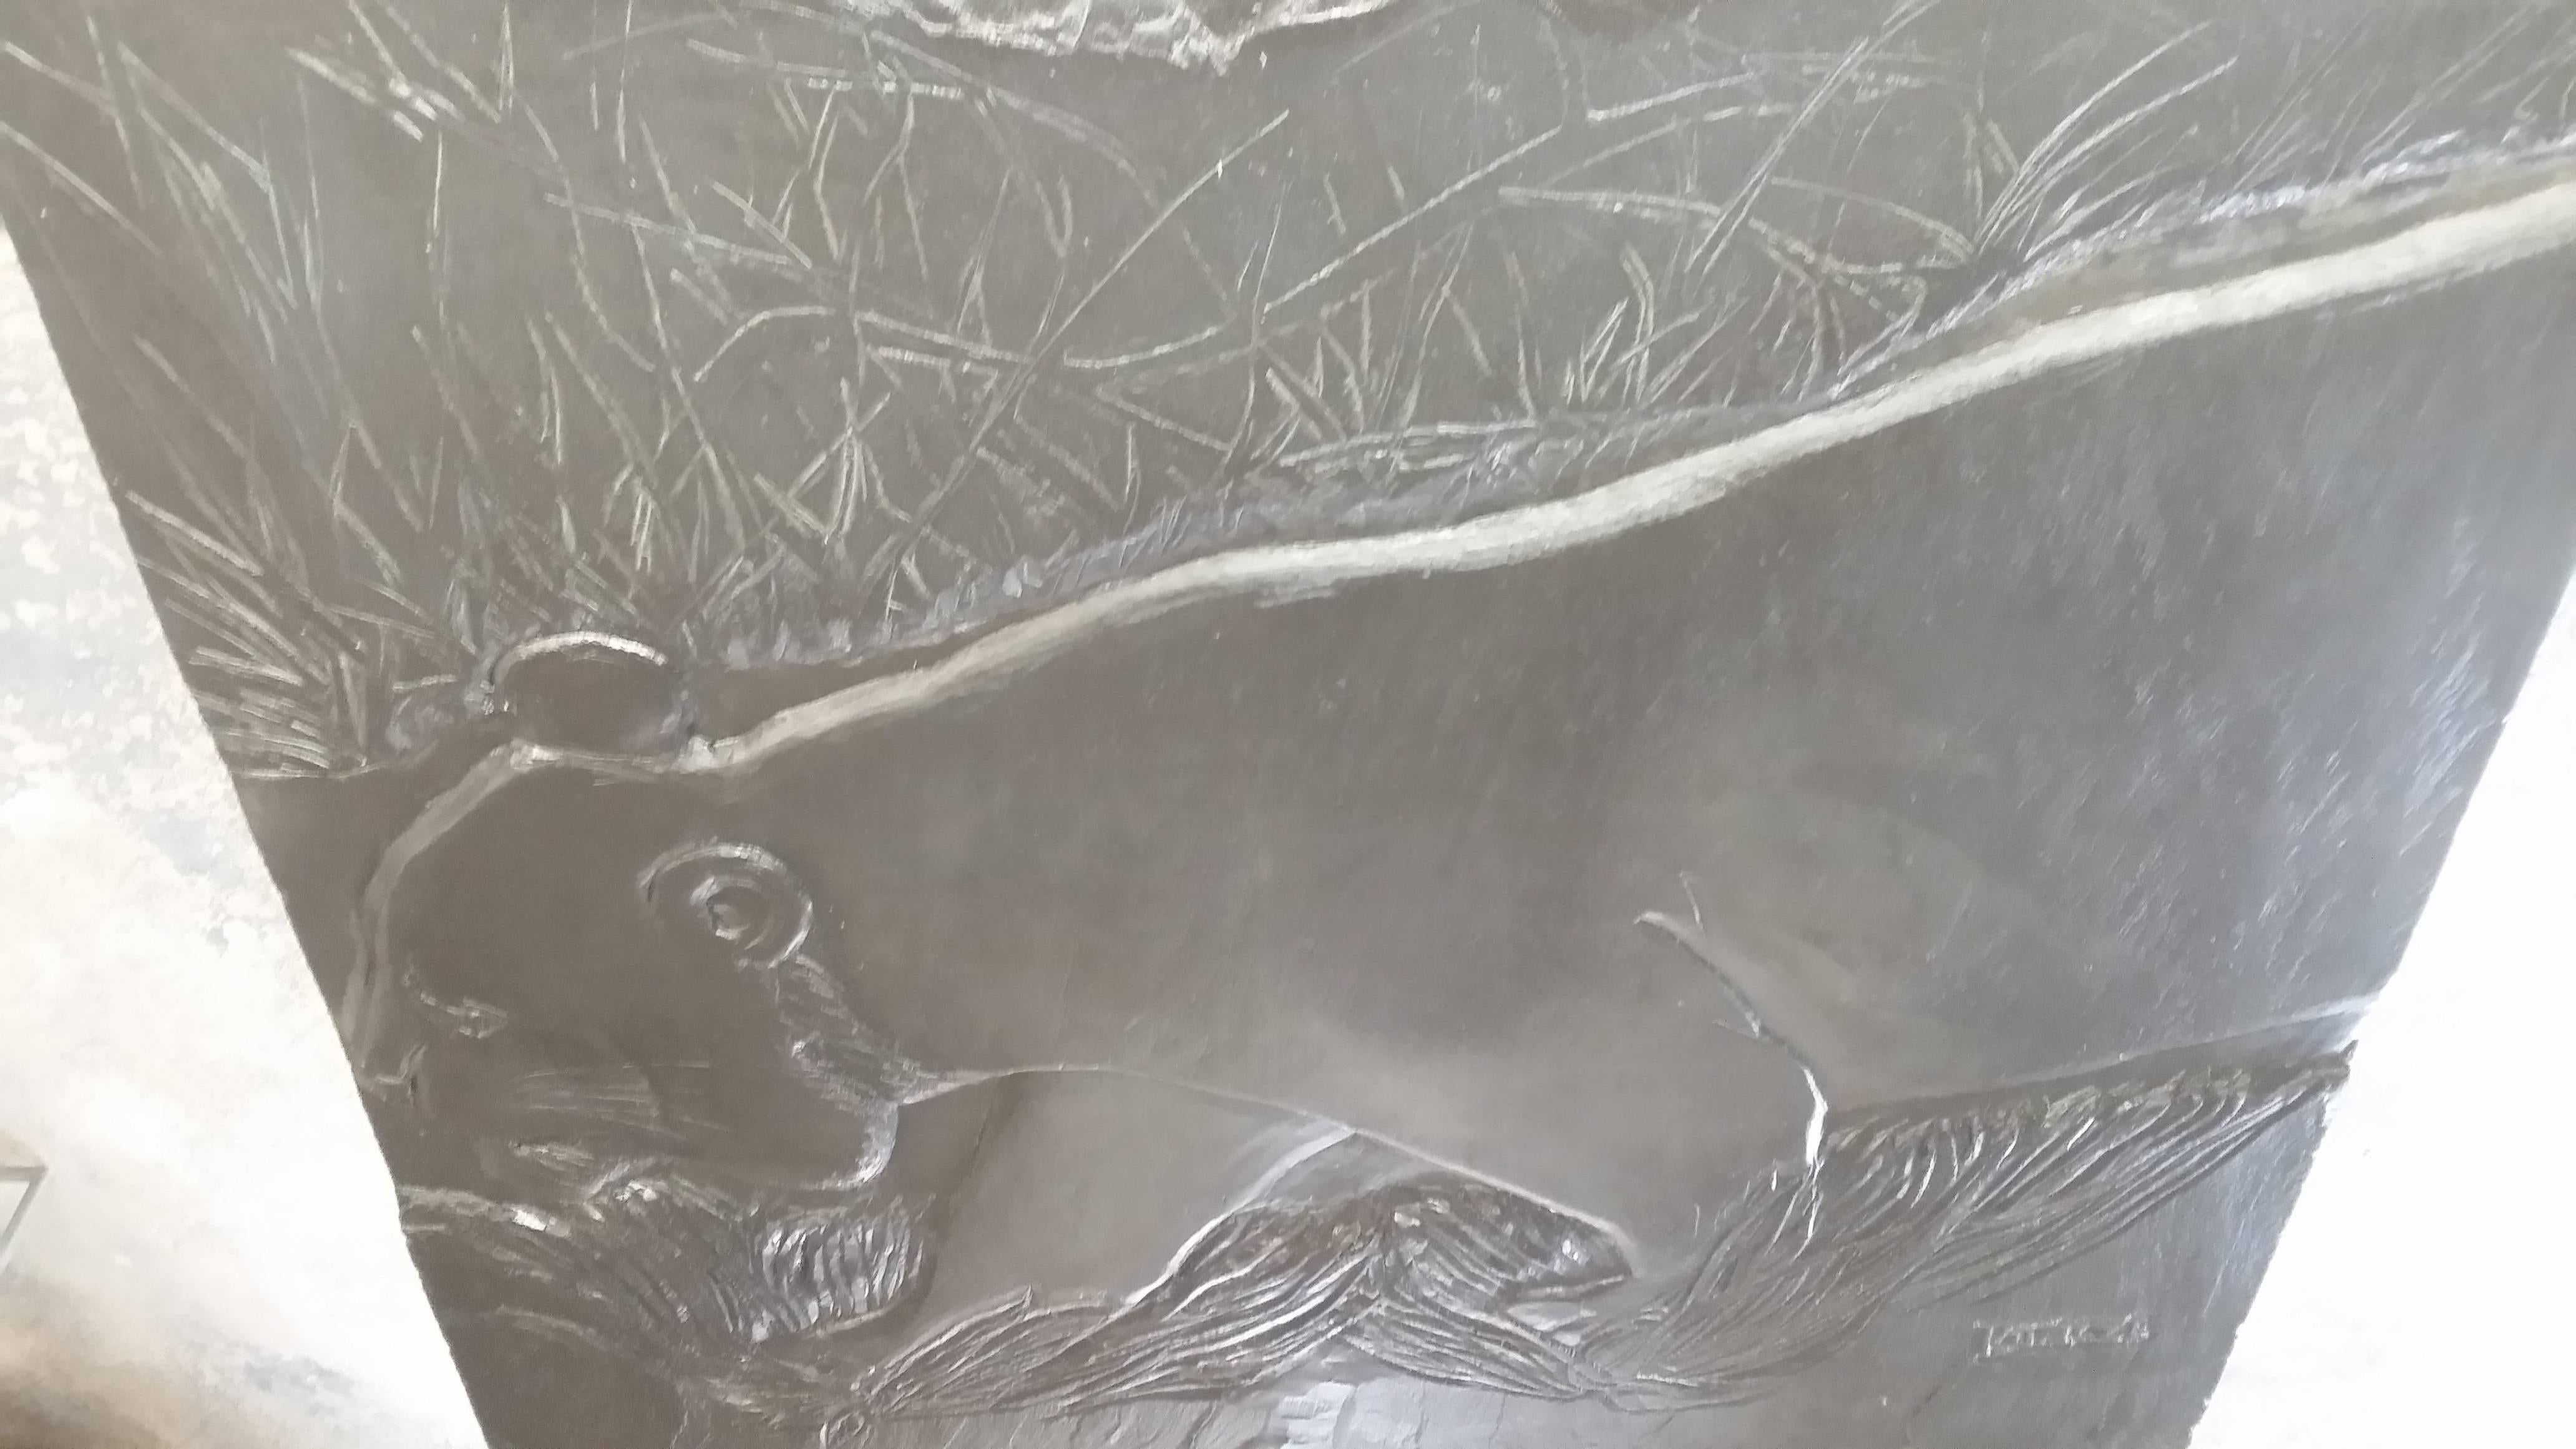 Large bas relief sculpture on a solid slab of 3/4